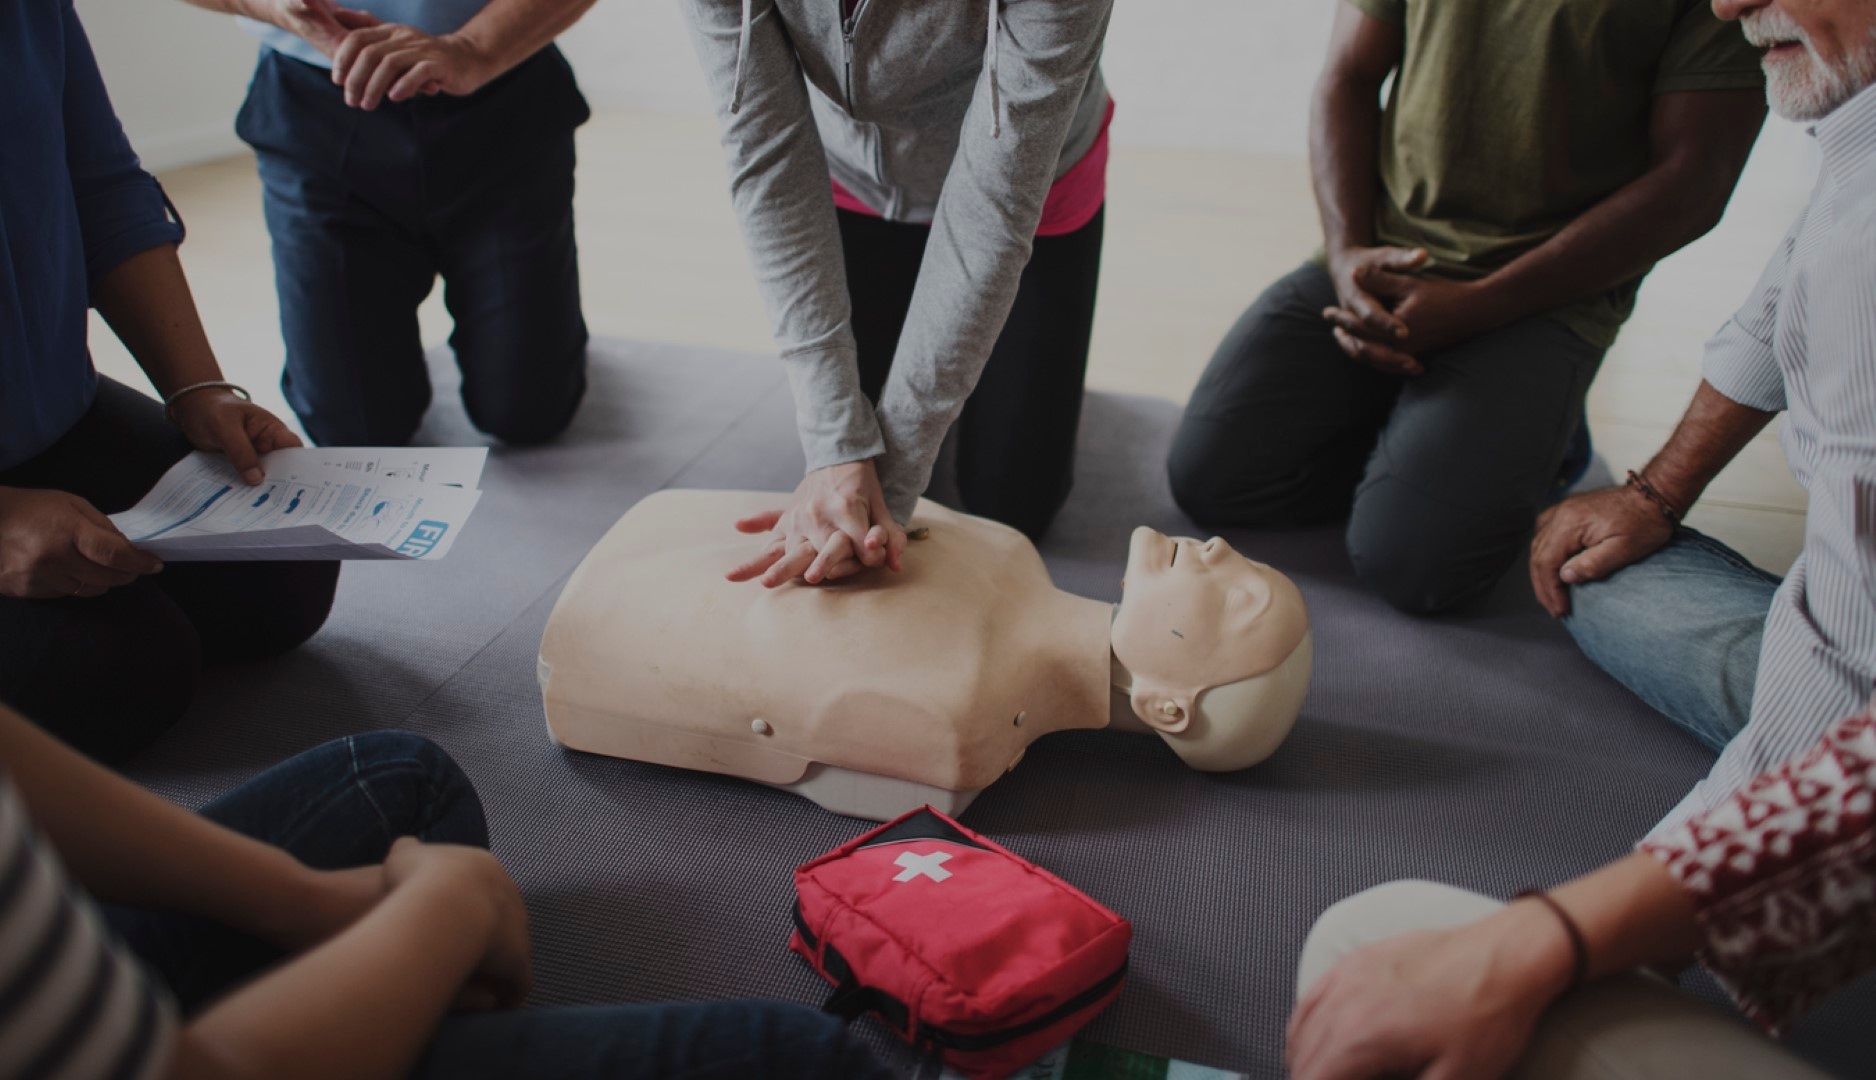 CPR being practiced on a dummy human